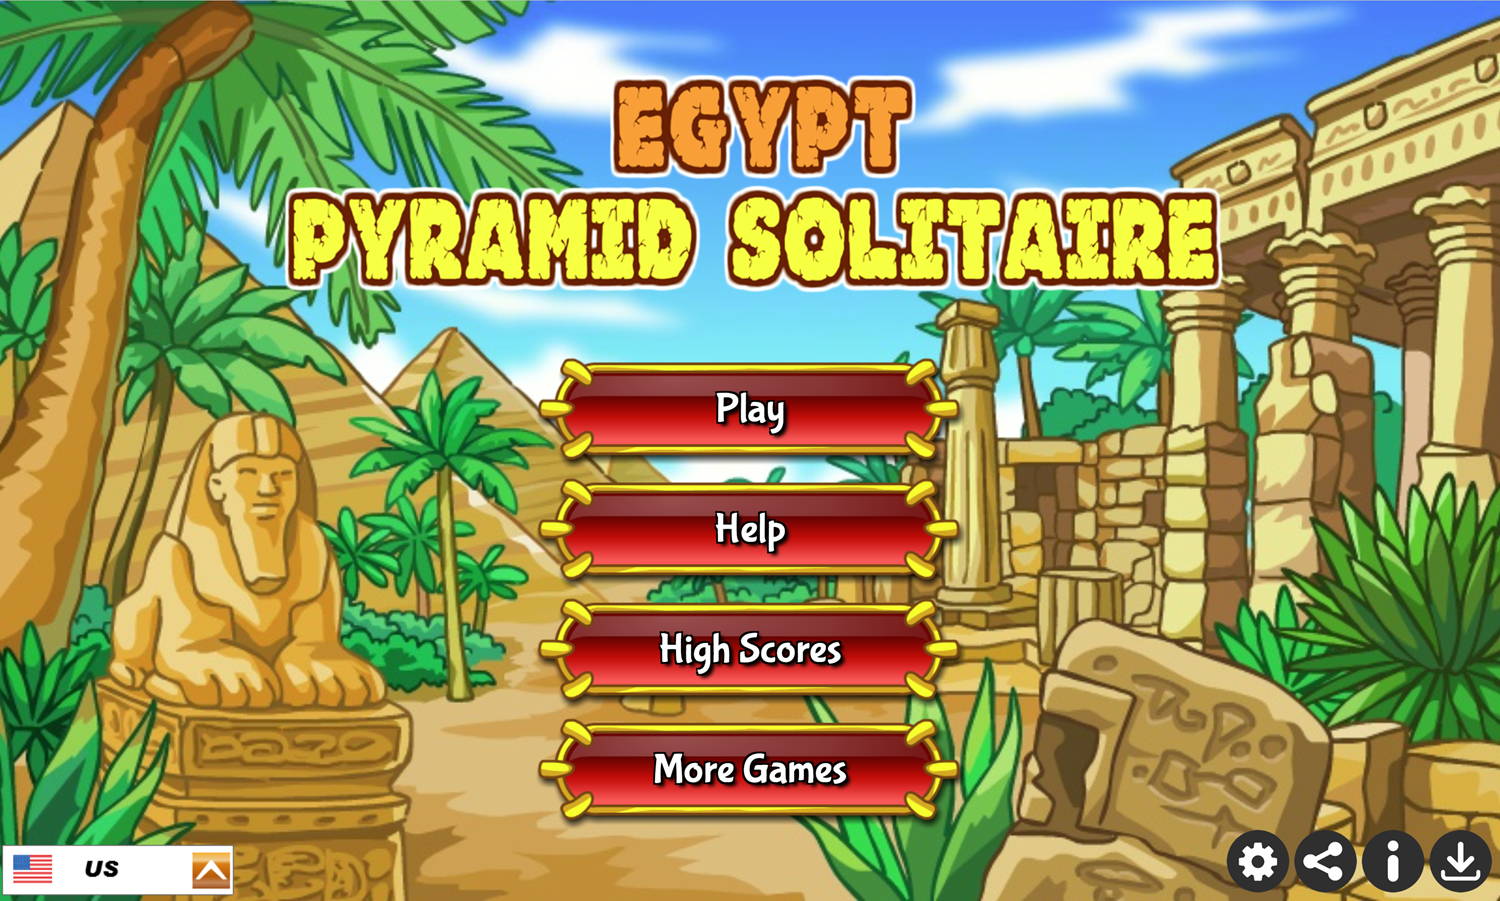 Egypt Pyramid Solitaire Game Welcome Screen Screenshot.